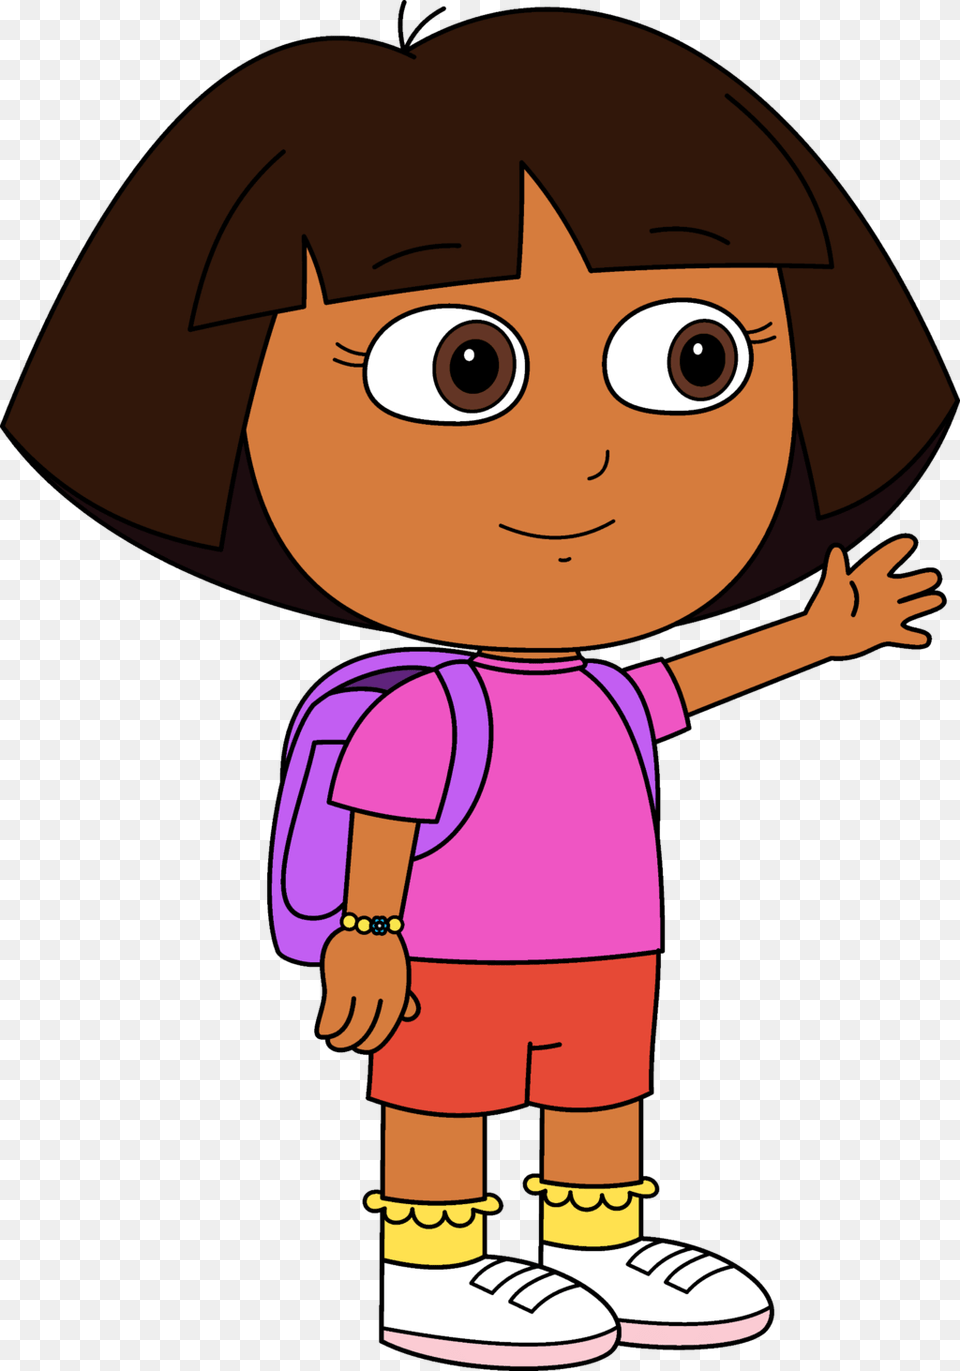 Dora The Explorer Draw Style First Form By Ncontreras Dora The Explorer Art Style, Baby, Person, Cartoon, Book Free Transparent Png